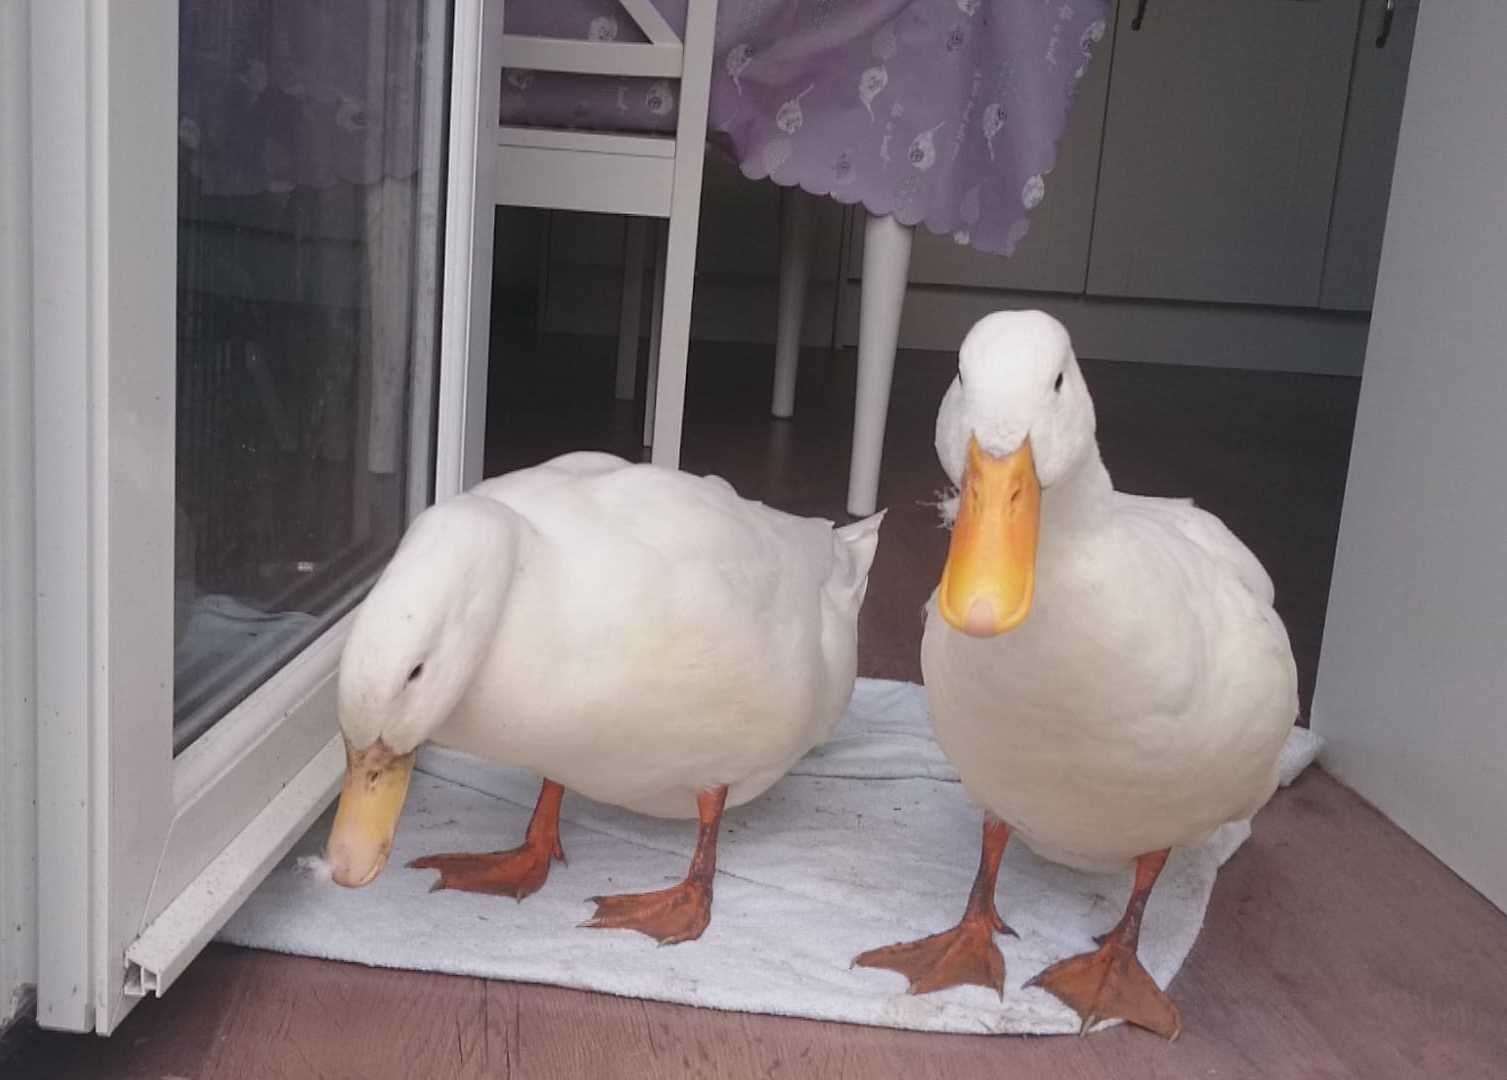 Linda is appealing for information to track down who killed her pet ducks